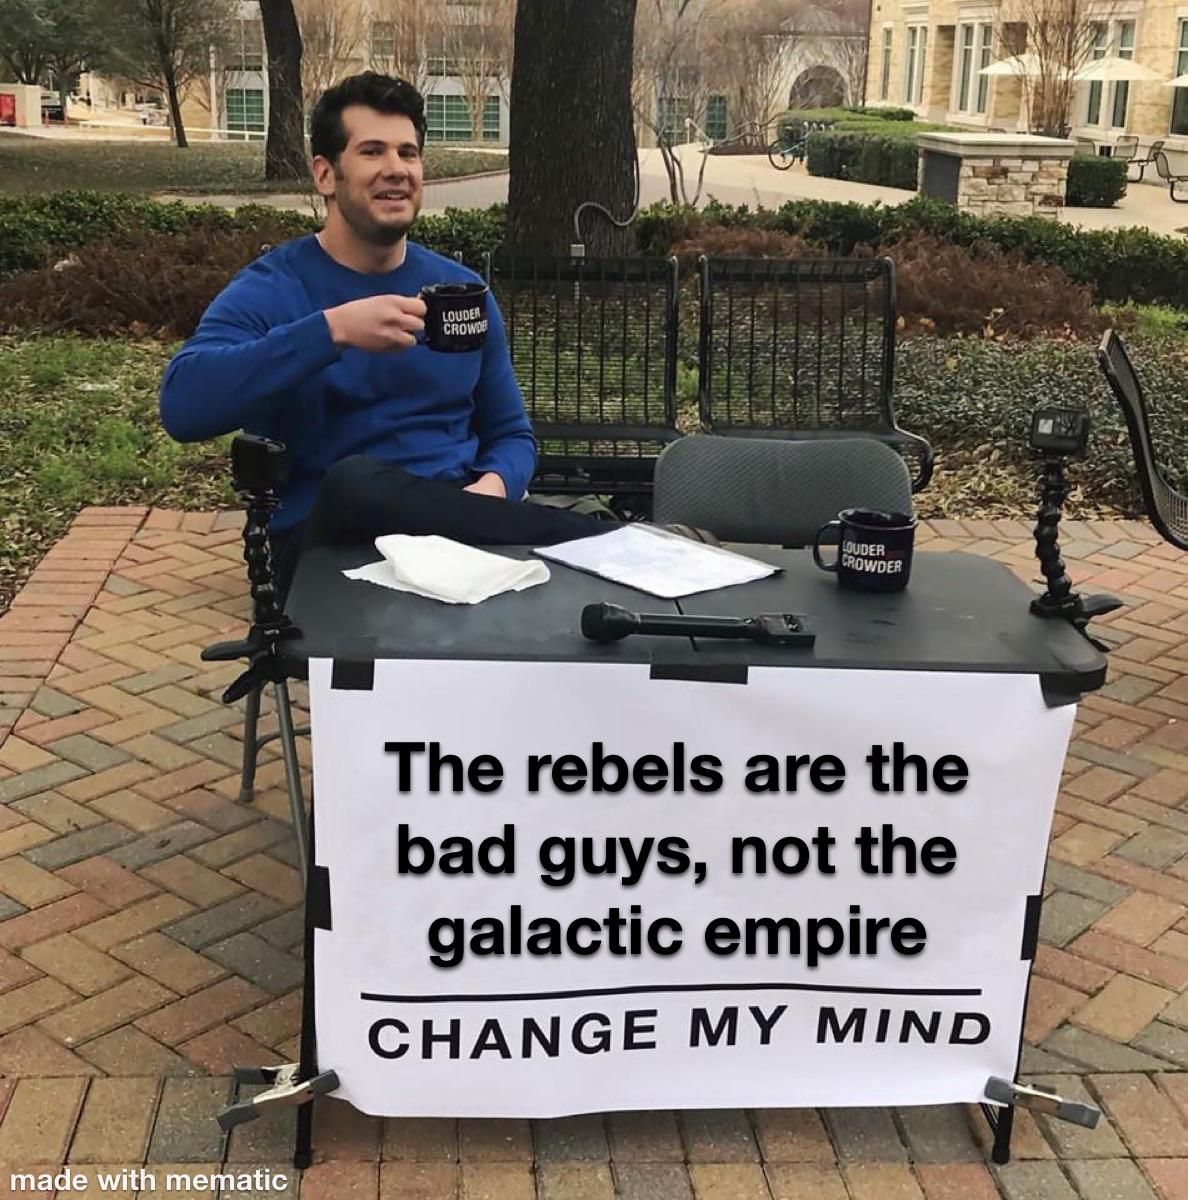 The rebels were so much worse